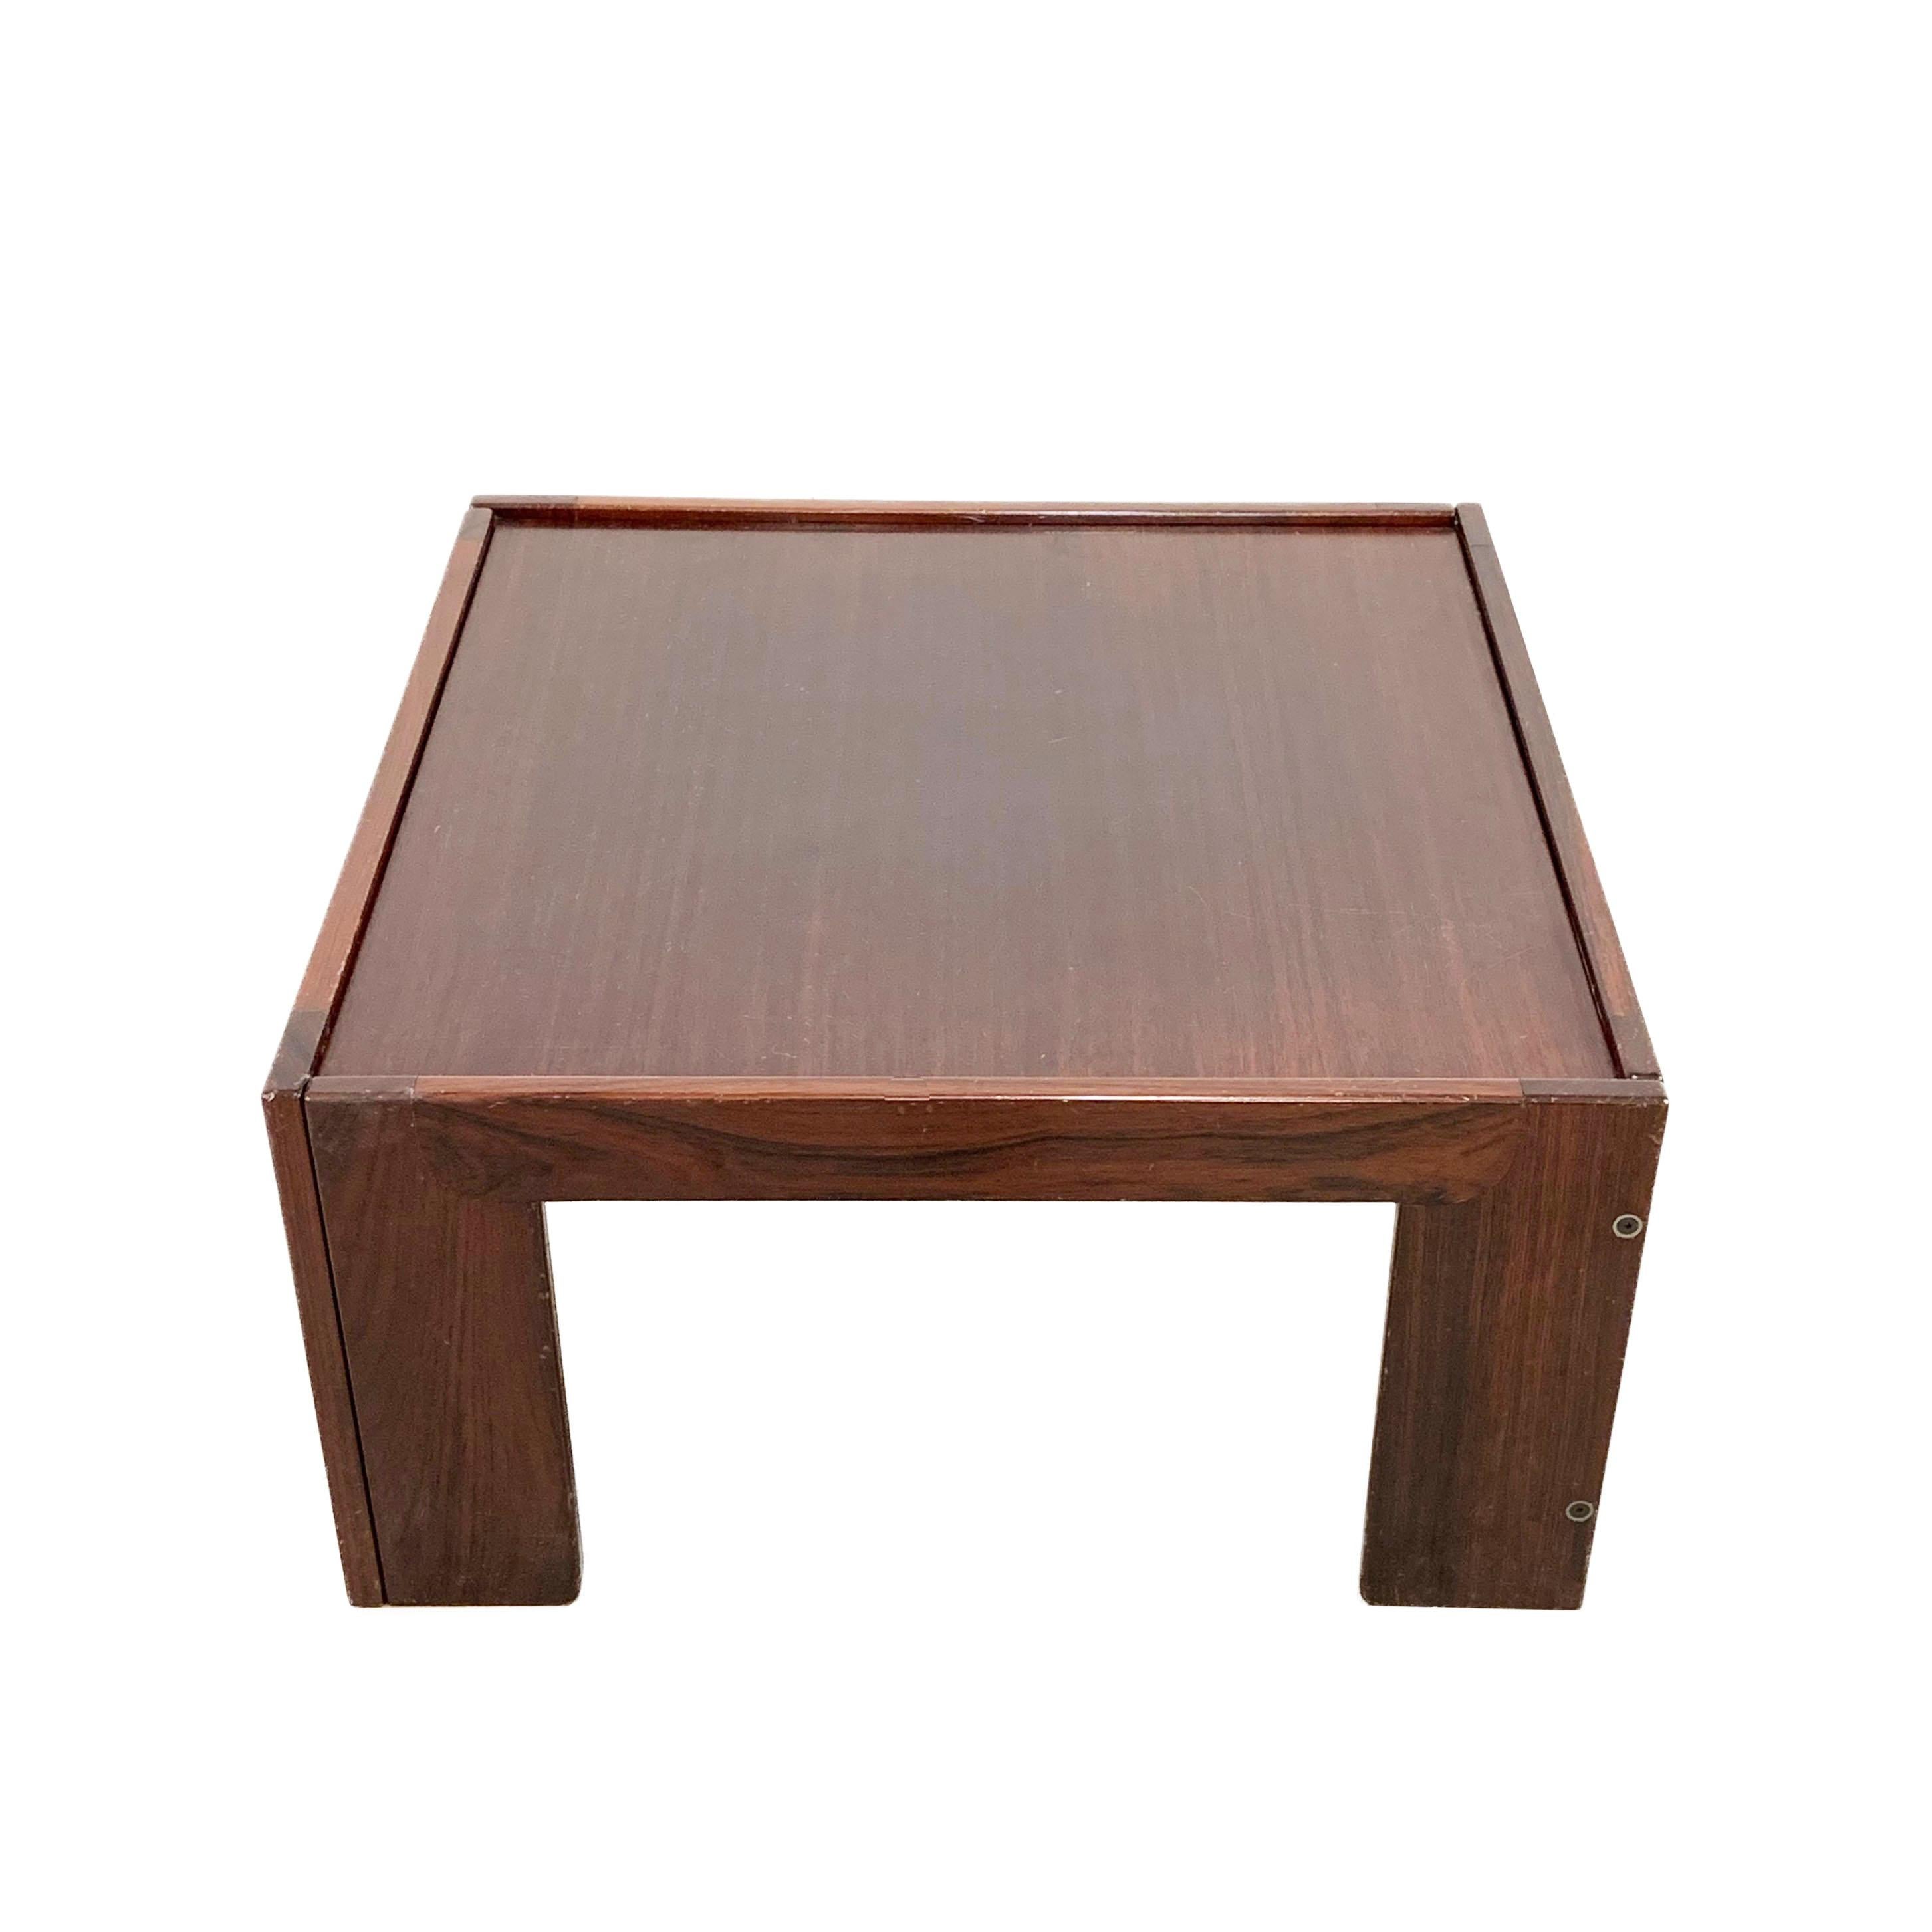 Cassina, coffee table (Afra & Tobia Scarpa, 1965)
Square table (75 x 75 x 39 cm) in rosewood designed by Afra & Tobia Scarpa for Cassina in 1965. Removable rosewood top.
Some light scratches and signs of use.
Easily removable and remountable for